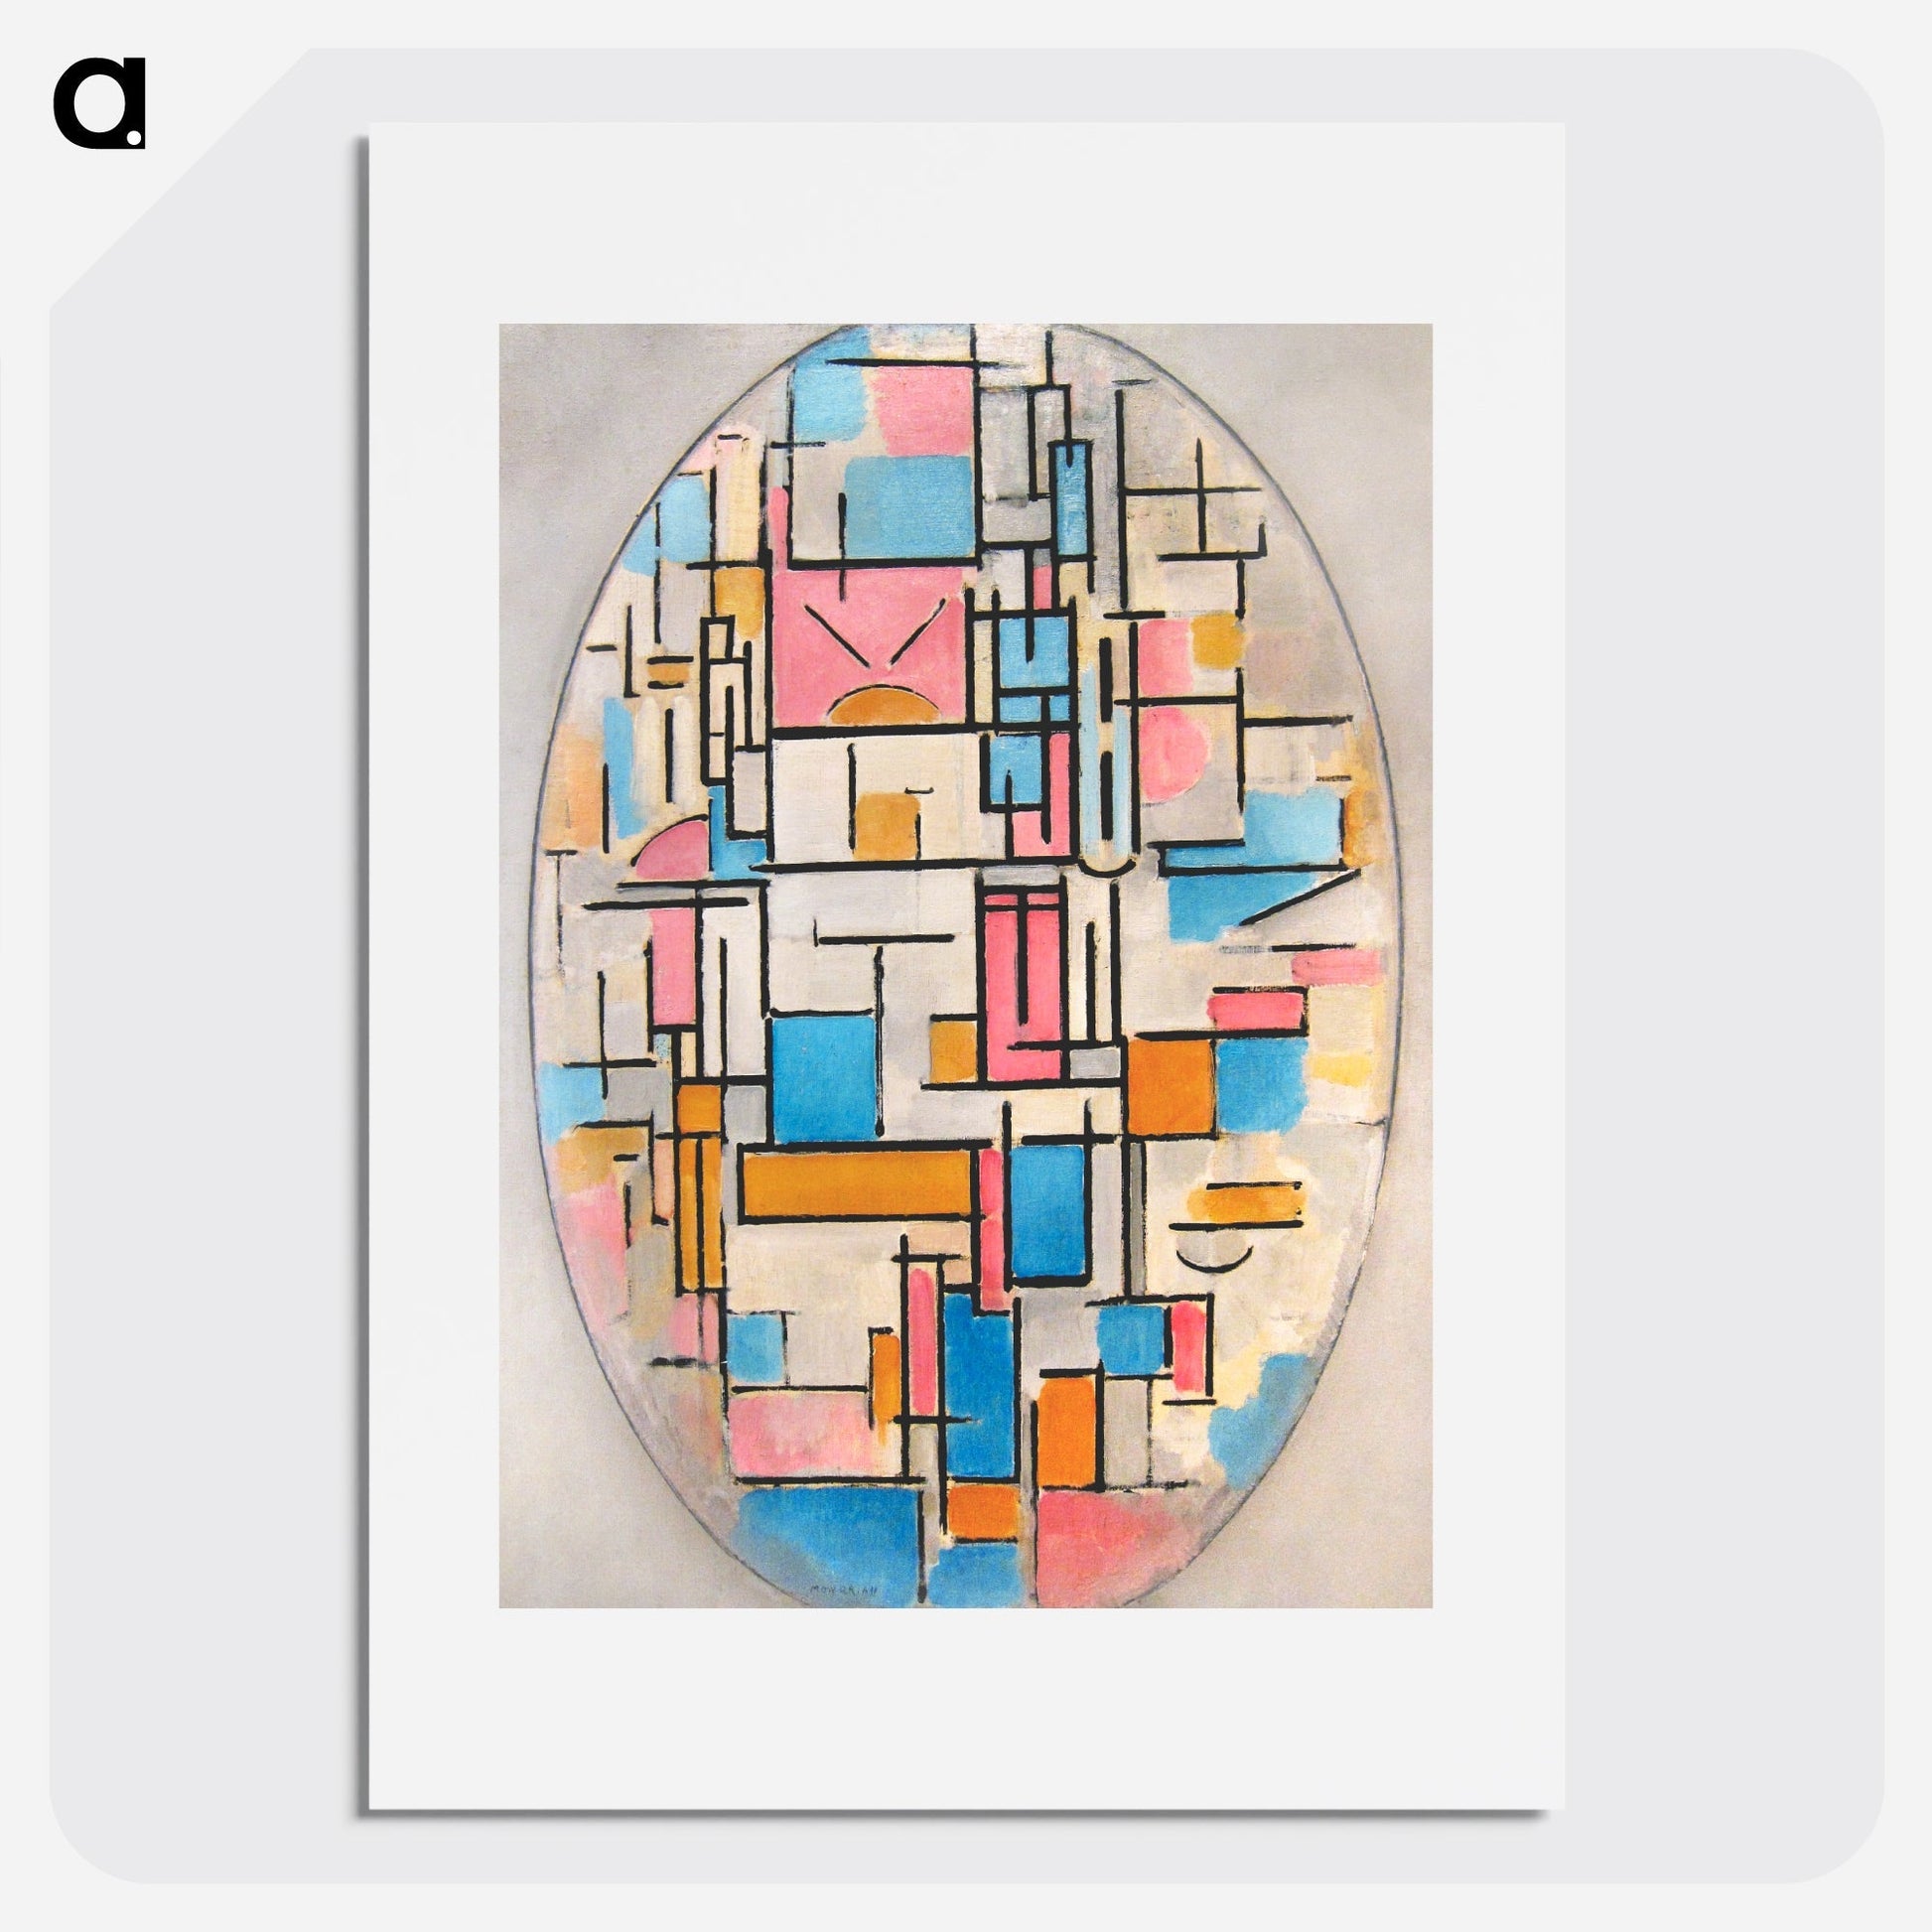 Composition in Oval with Color Planes 1 Poster. - artgraph.